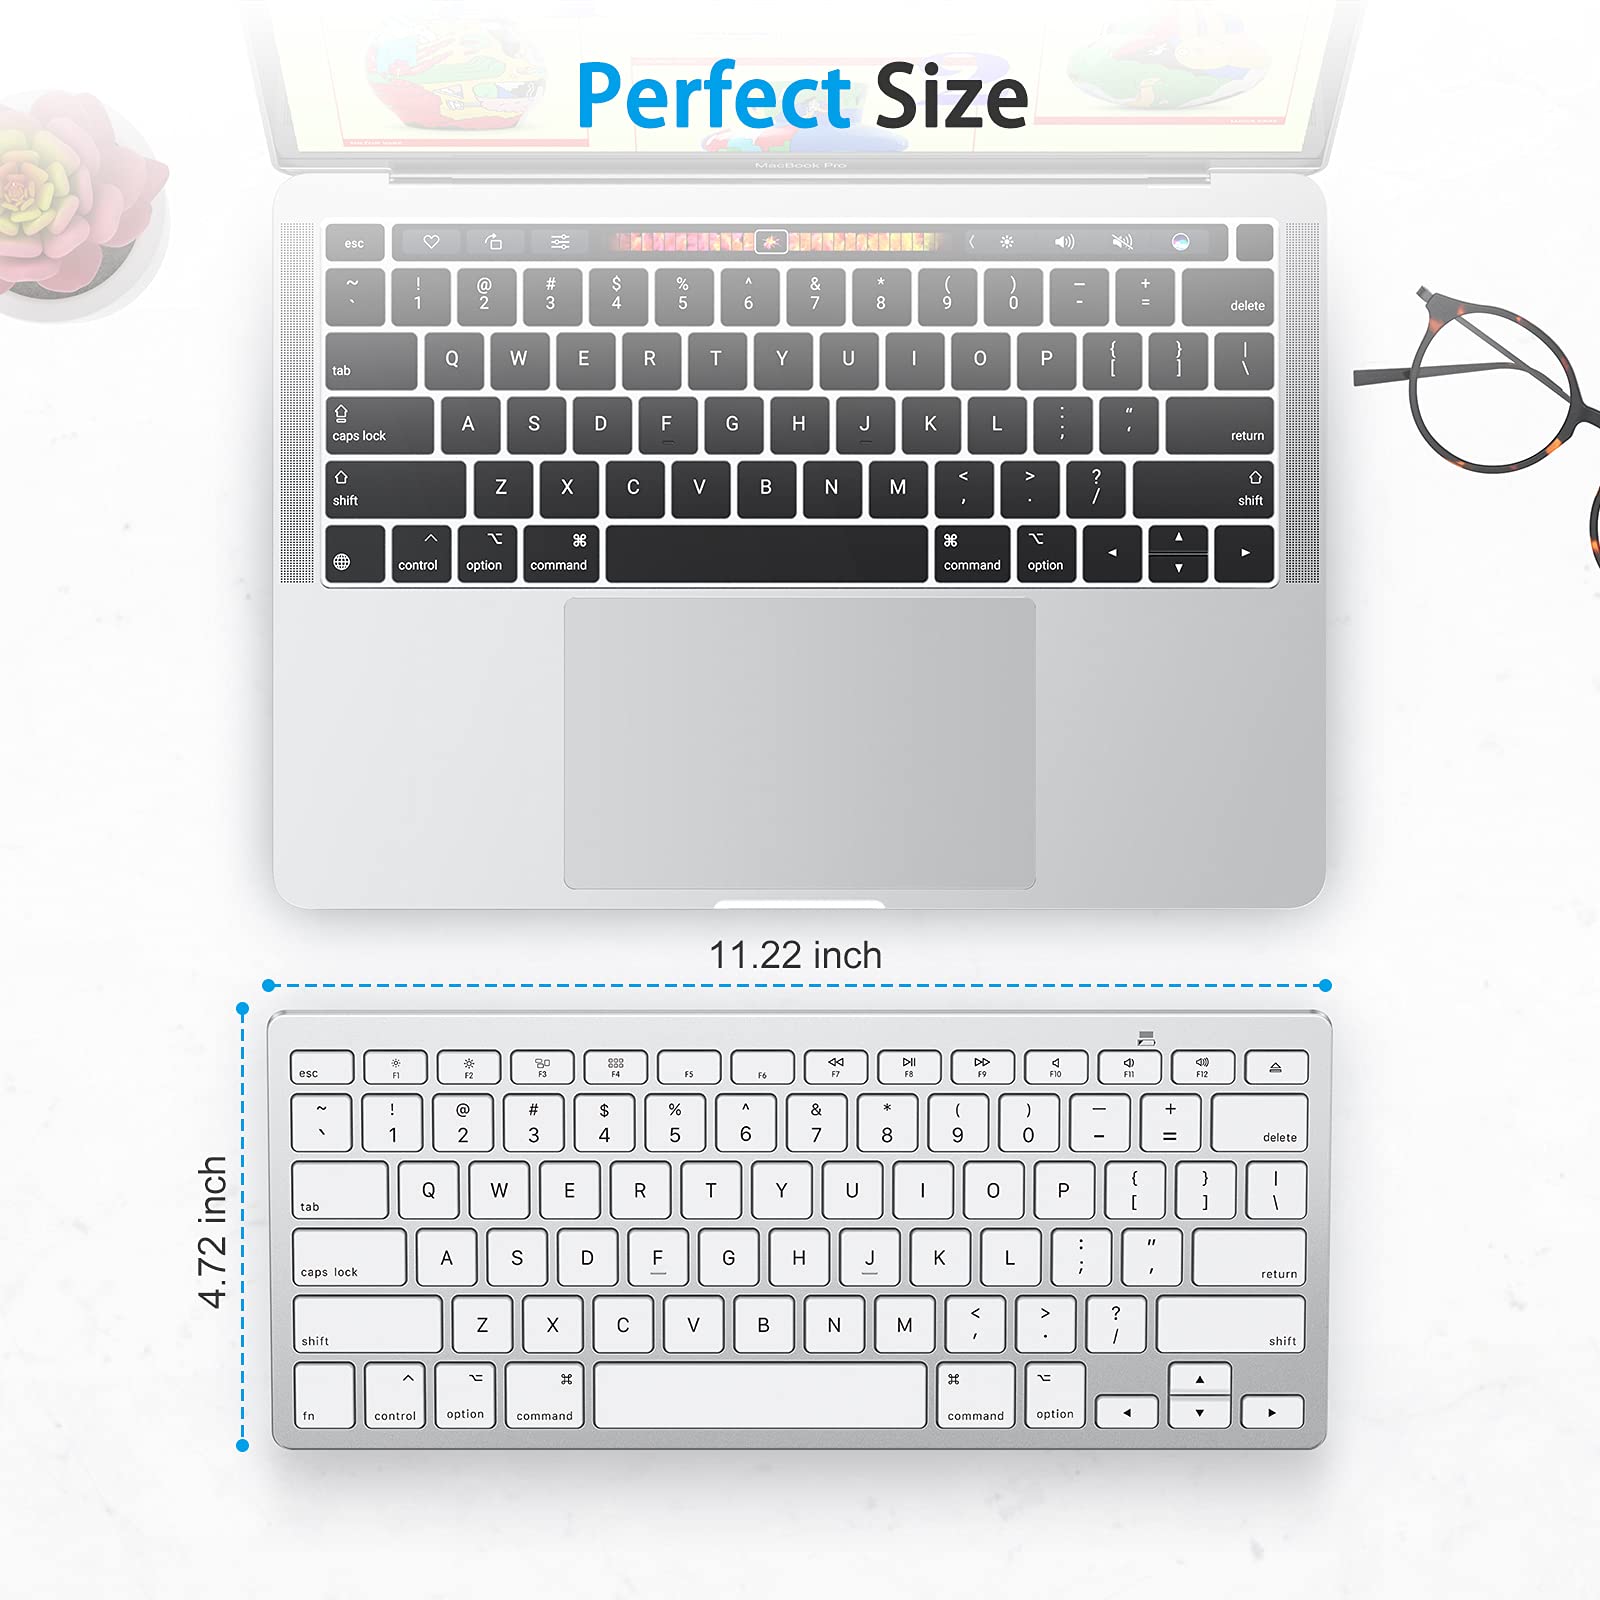 OMOTON Compact Wireless Bluetooth Keyboard for MacBook, iMac, Mac Mini - Compatible with Apple Laptops and Desktops